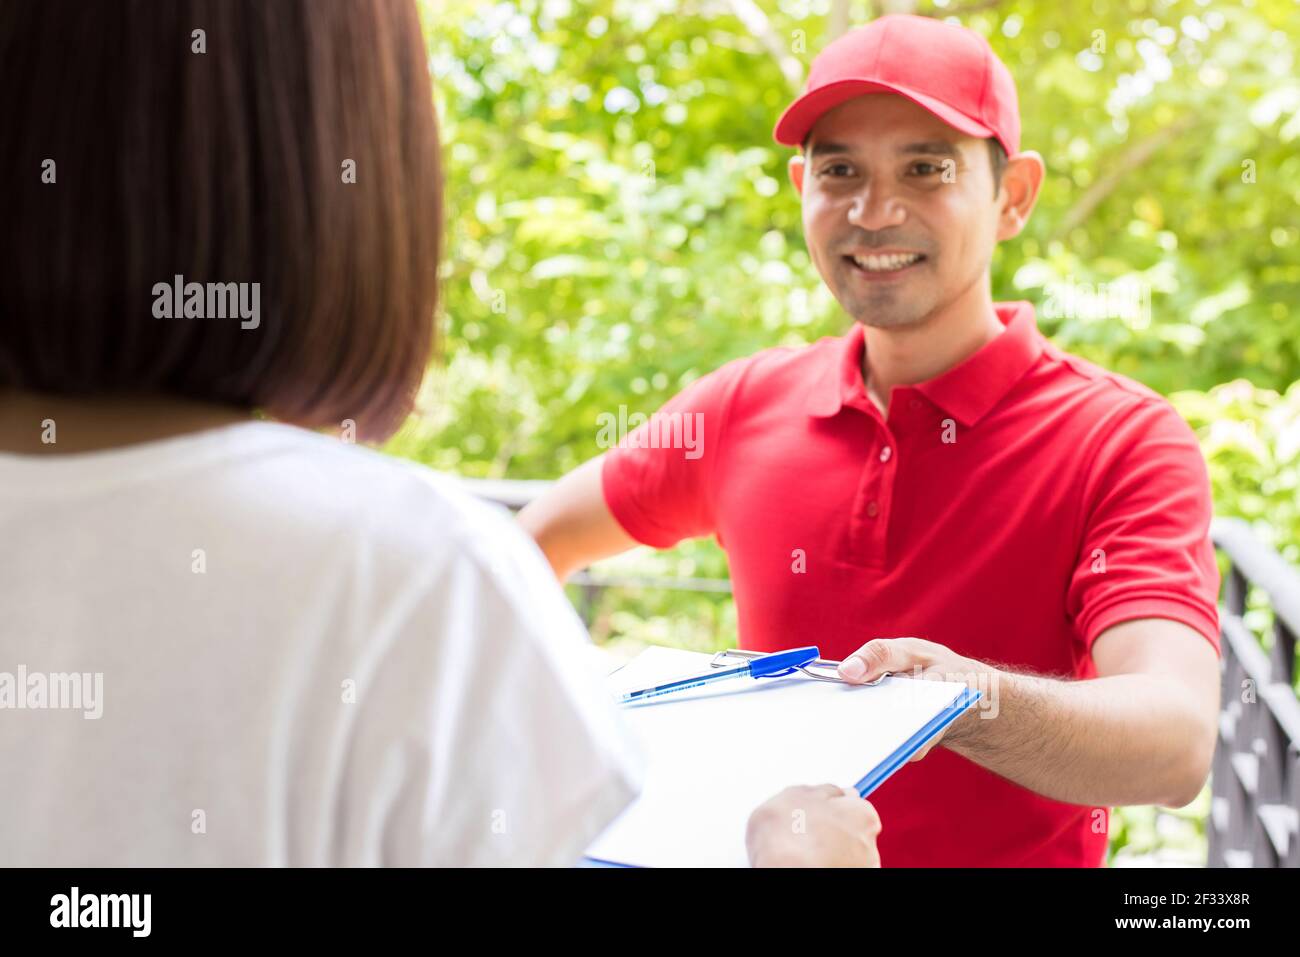 Delivery man giving clipboard to a woman to sign Stock Photo